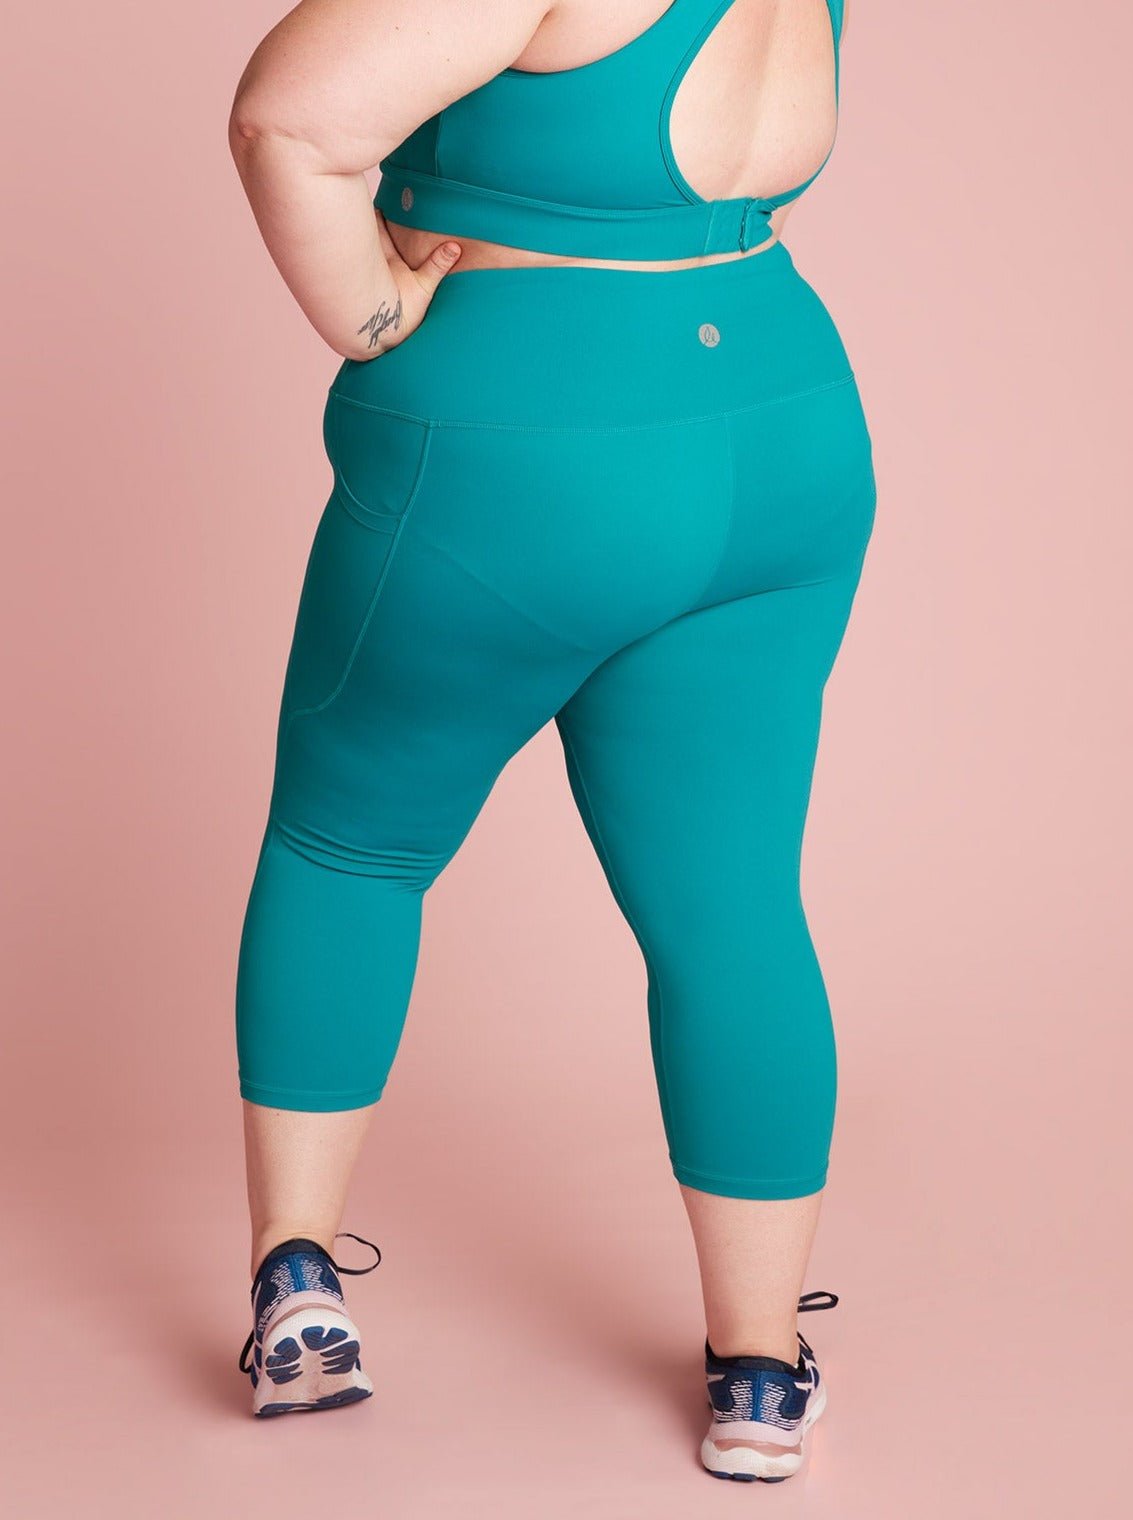 Forest Green Everyday Cropped Legging - 3/4 length - plus size squat proof